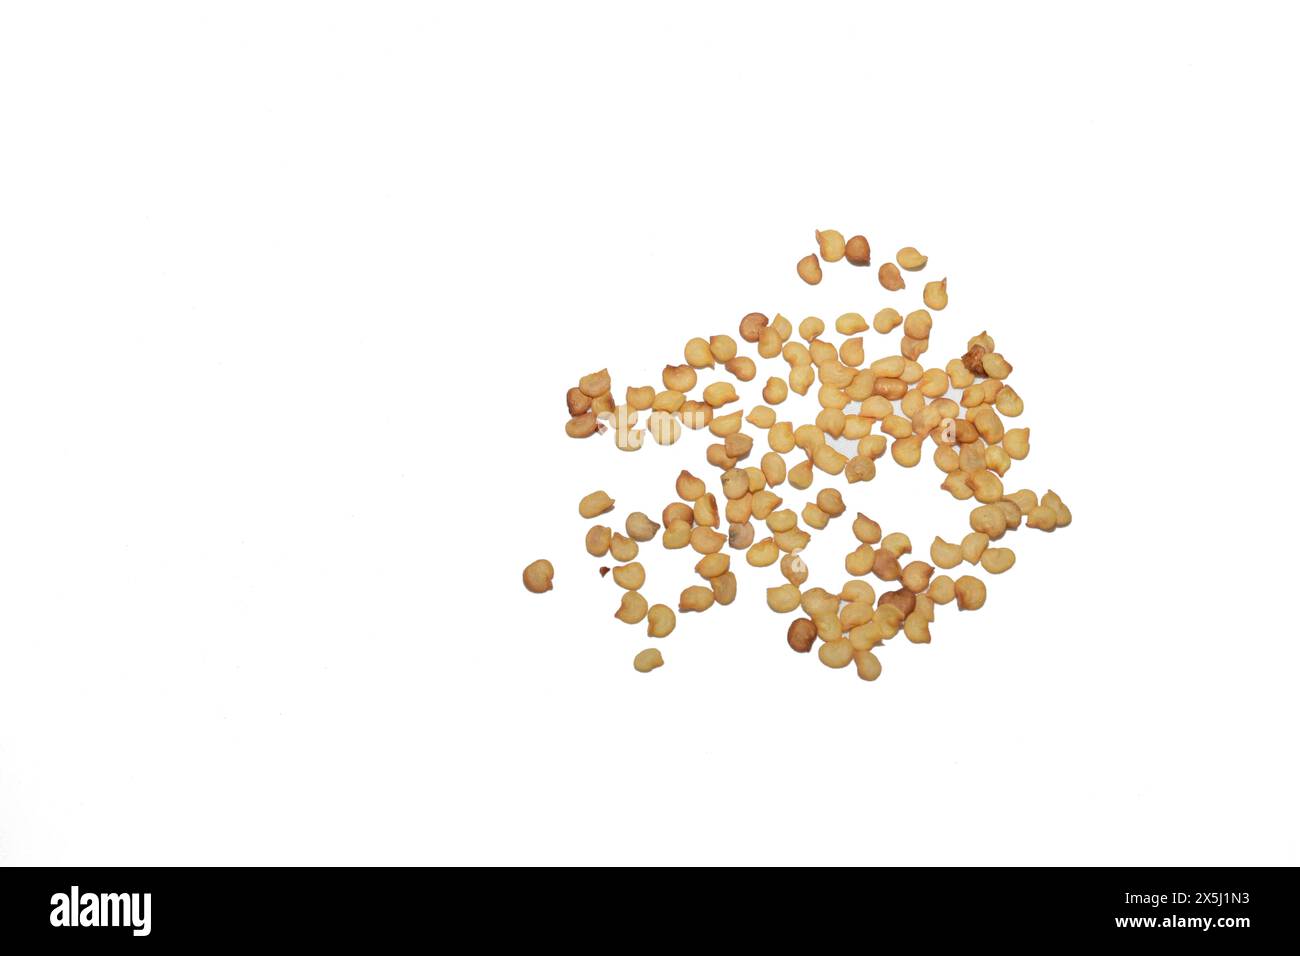 Pepper seeds lie in a small pile on a white background, ready for planting in the garden. Stock Photo